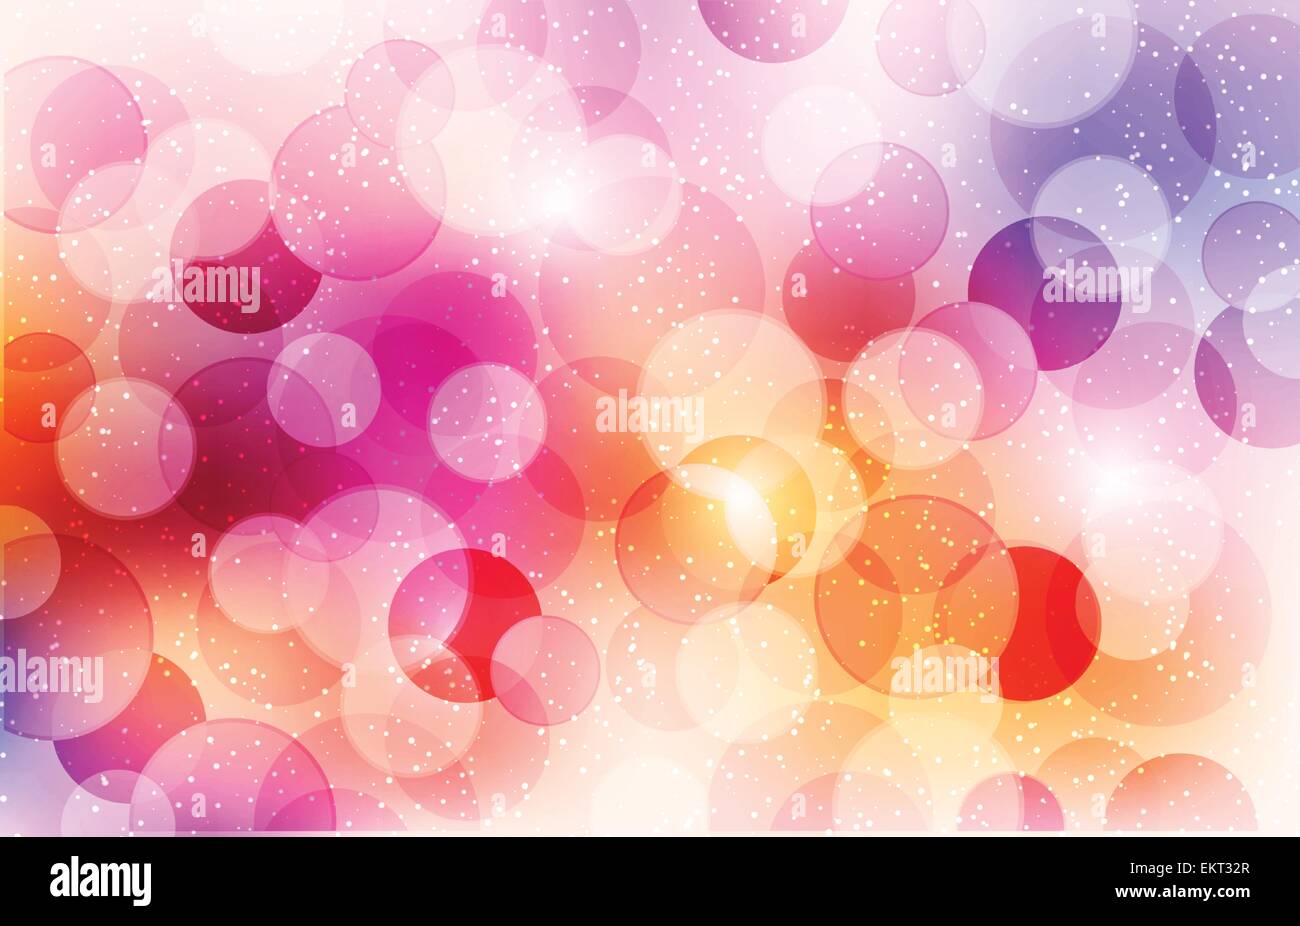 abstract background with shiny circles Stock Vector